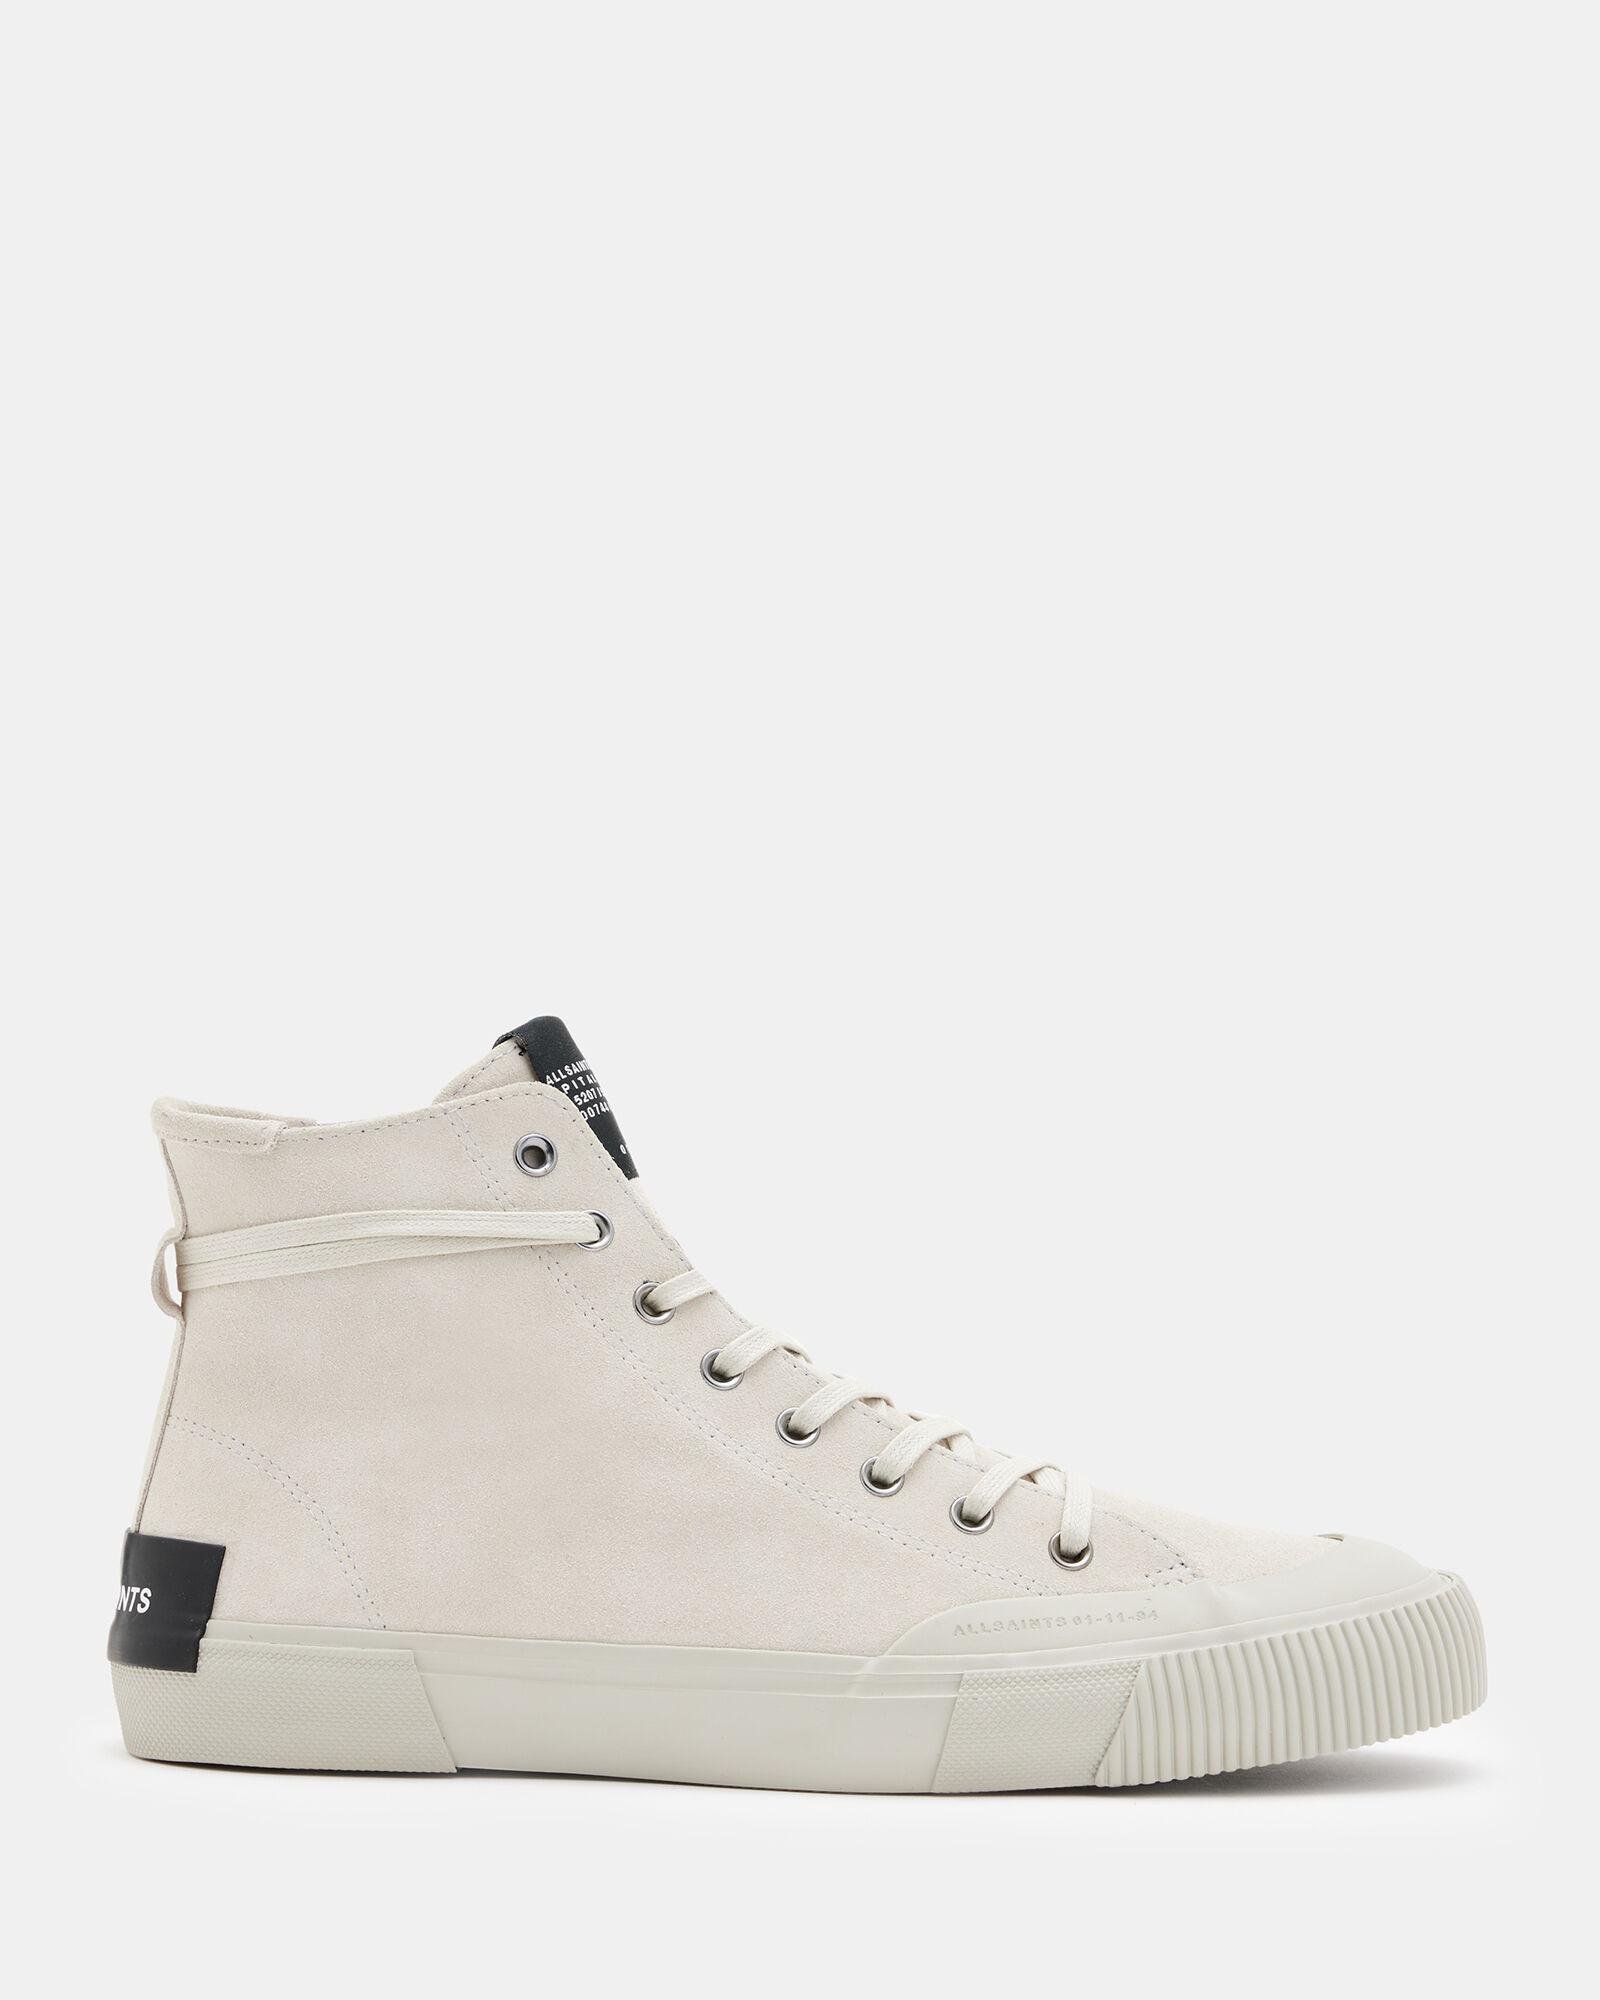 Dumont Suede High Top Sneakers by ALLSAINTS